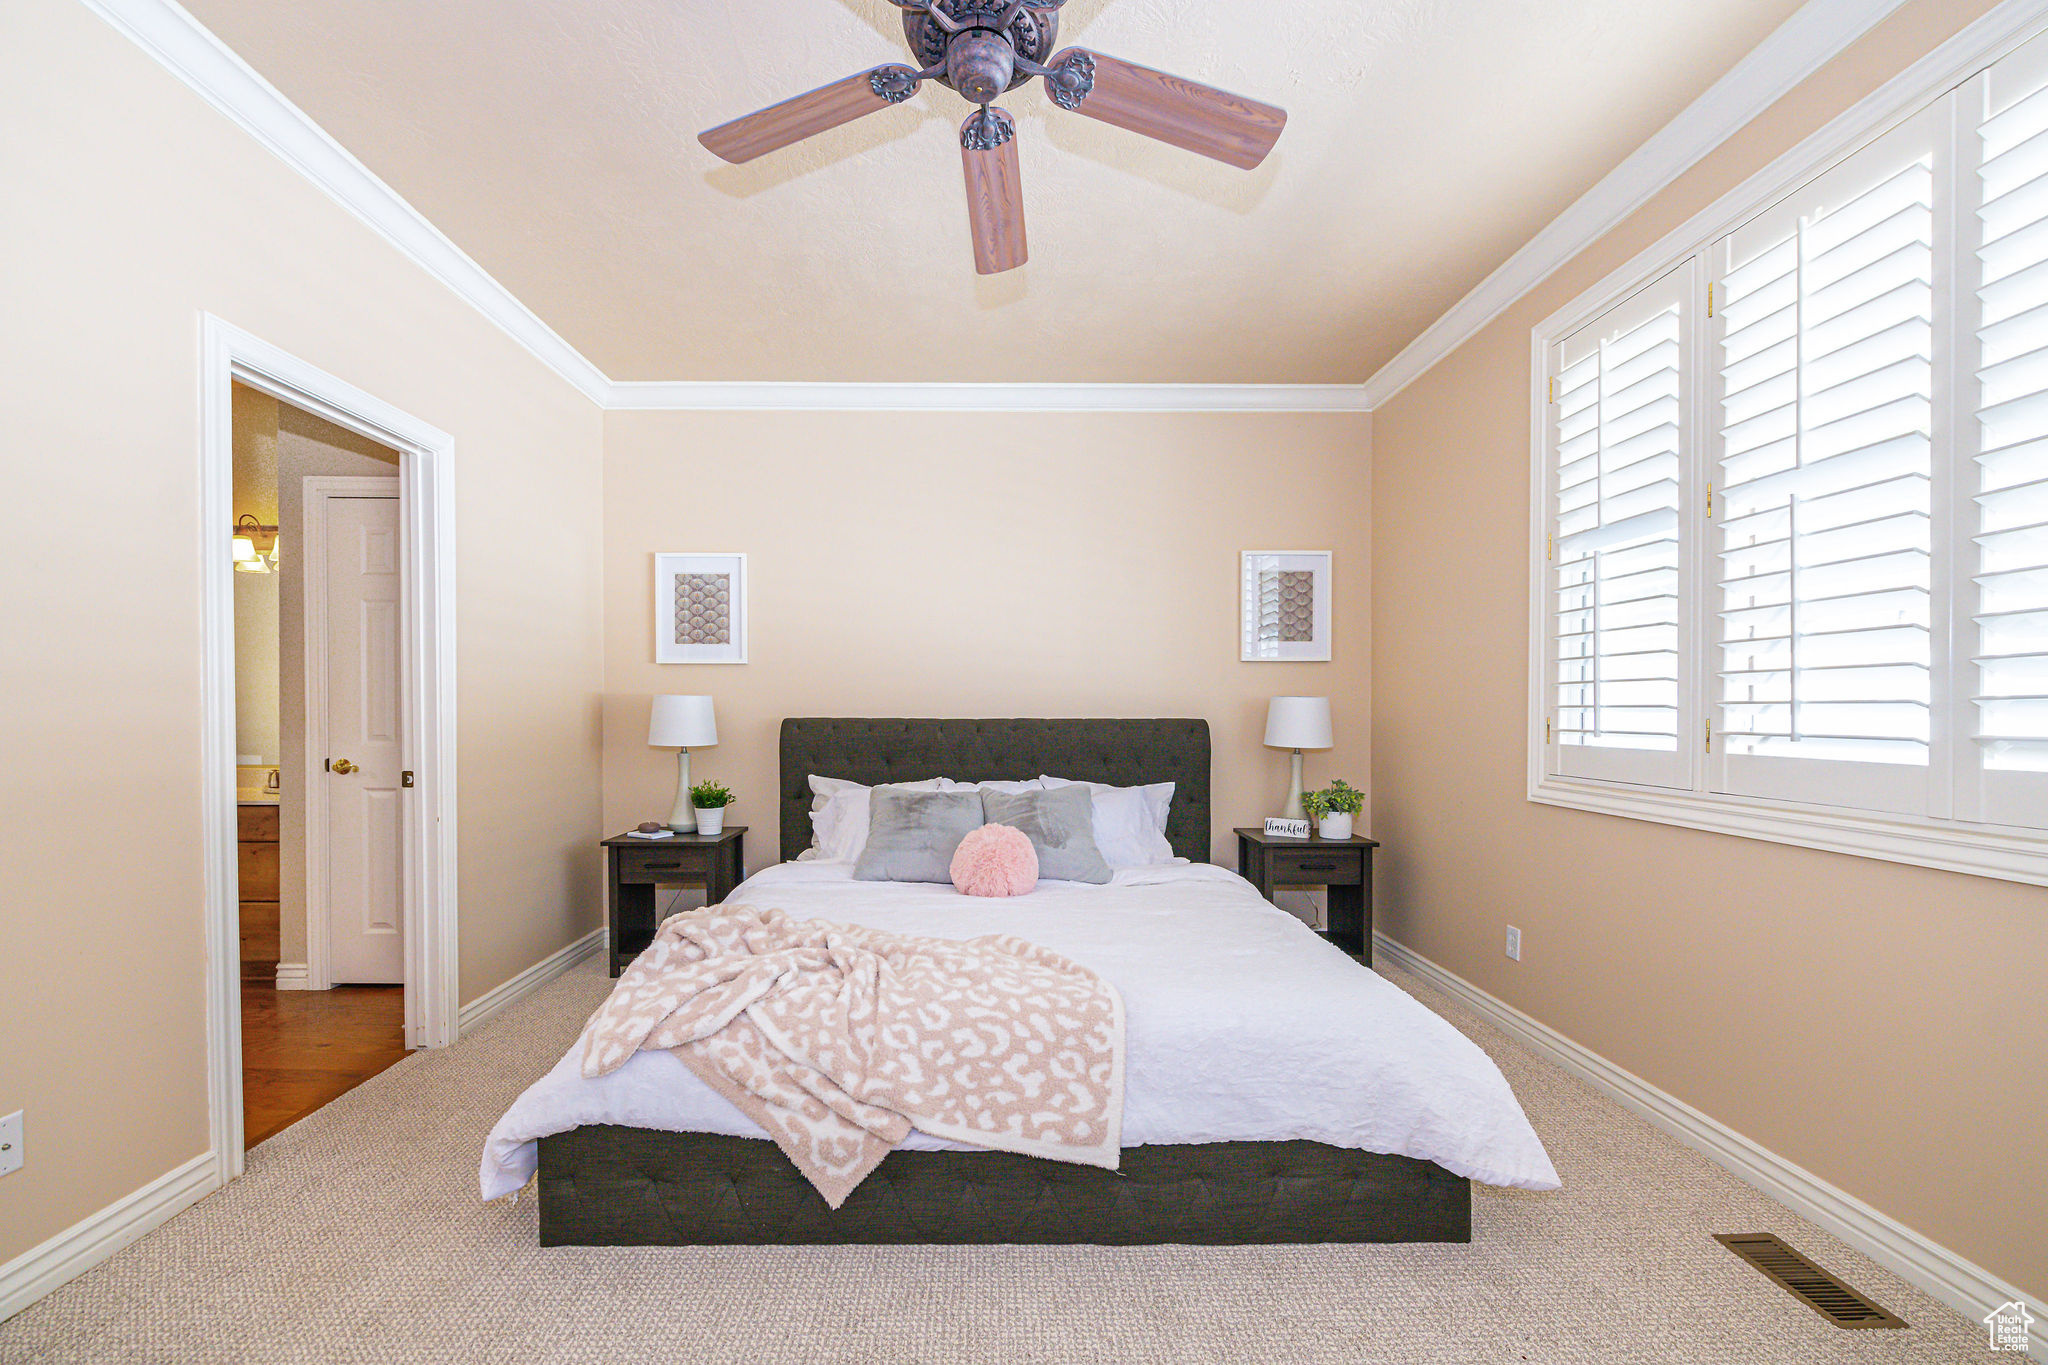 Bedroom with ceiling fan, crown molding, and carpet flooring